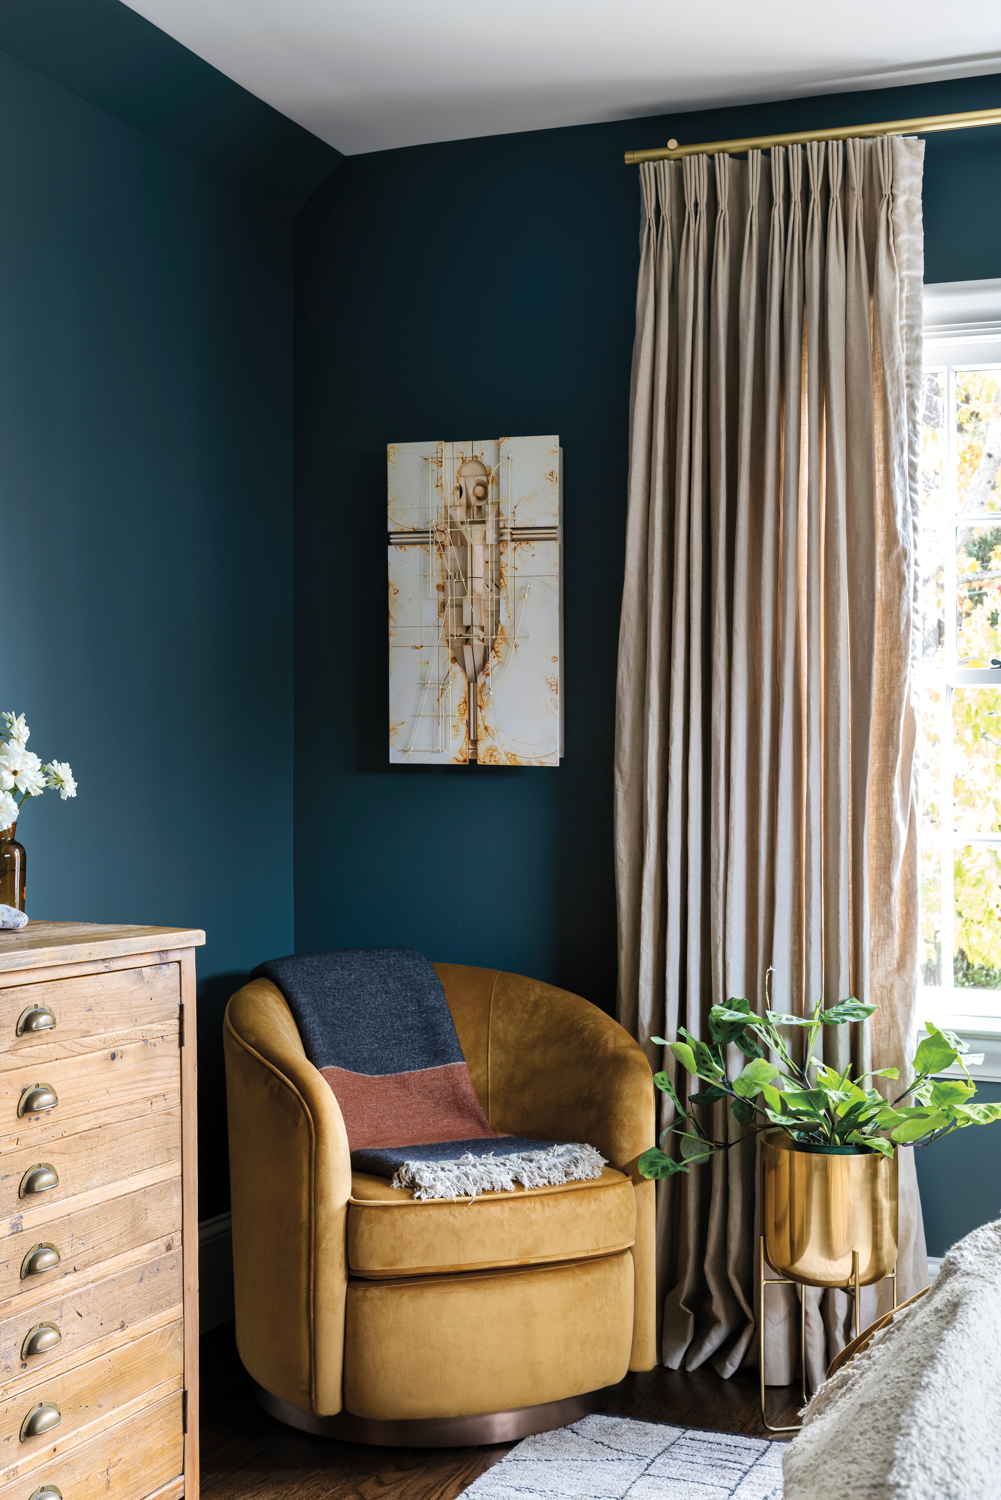 3 Color Tips To Dial Up The Drama Or Create A Sense Of Cozy